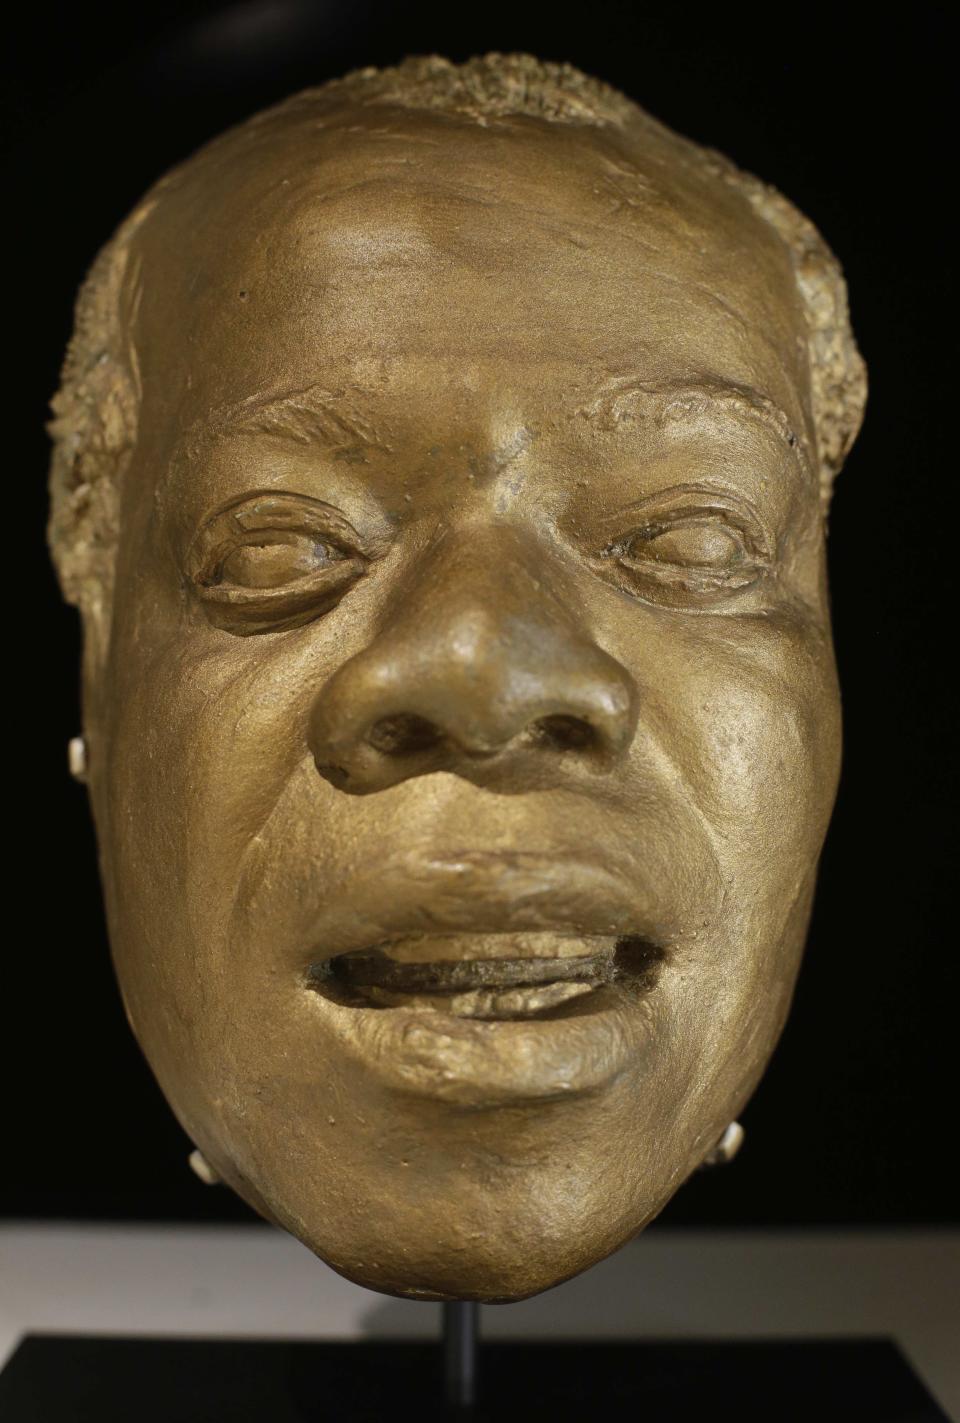 Louis Armstrong's life mask appears on display at the Louis Armstrong House Museum, Wednesday, Oct. 9, 2013, in the Queens borough of New York. To mark the 10th anniversary of the Louis Armstrong museum in the modest brick house where he lived for 28 years, curators are unveiling one of the jazz trumpeter's most unusual artifacts, on Tuesday, Oct. 15, 2013, the plaster mask that had been stored in a cupboard for decades. (AP Photo/Frank Franklin II)